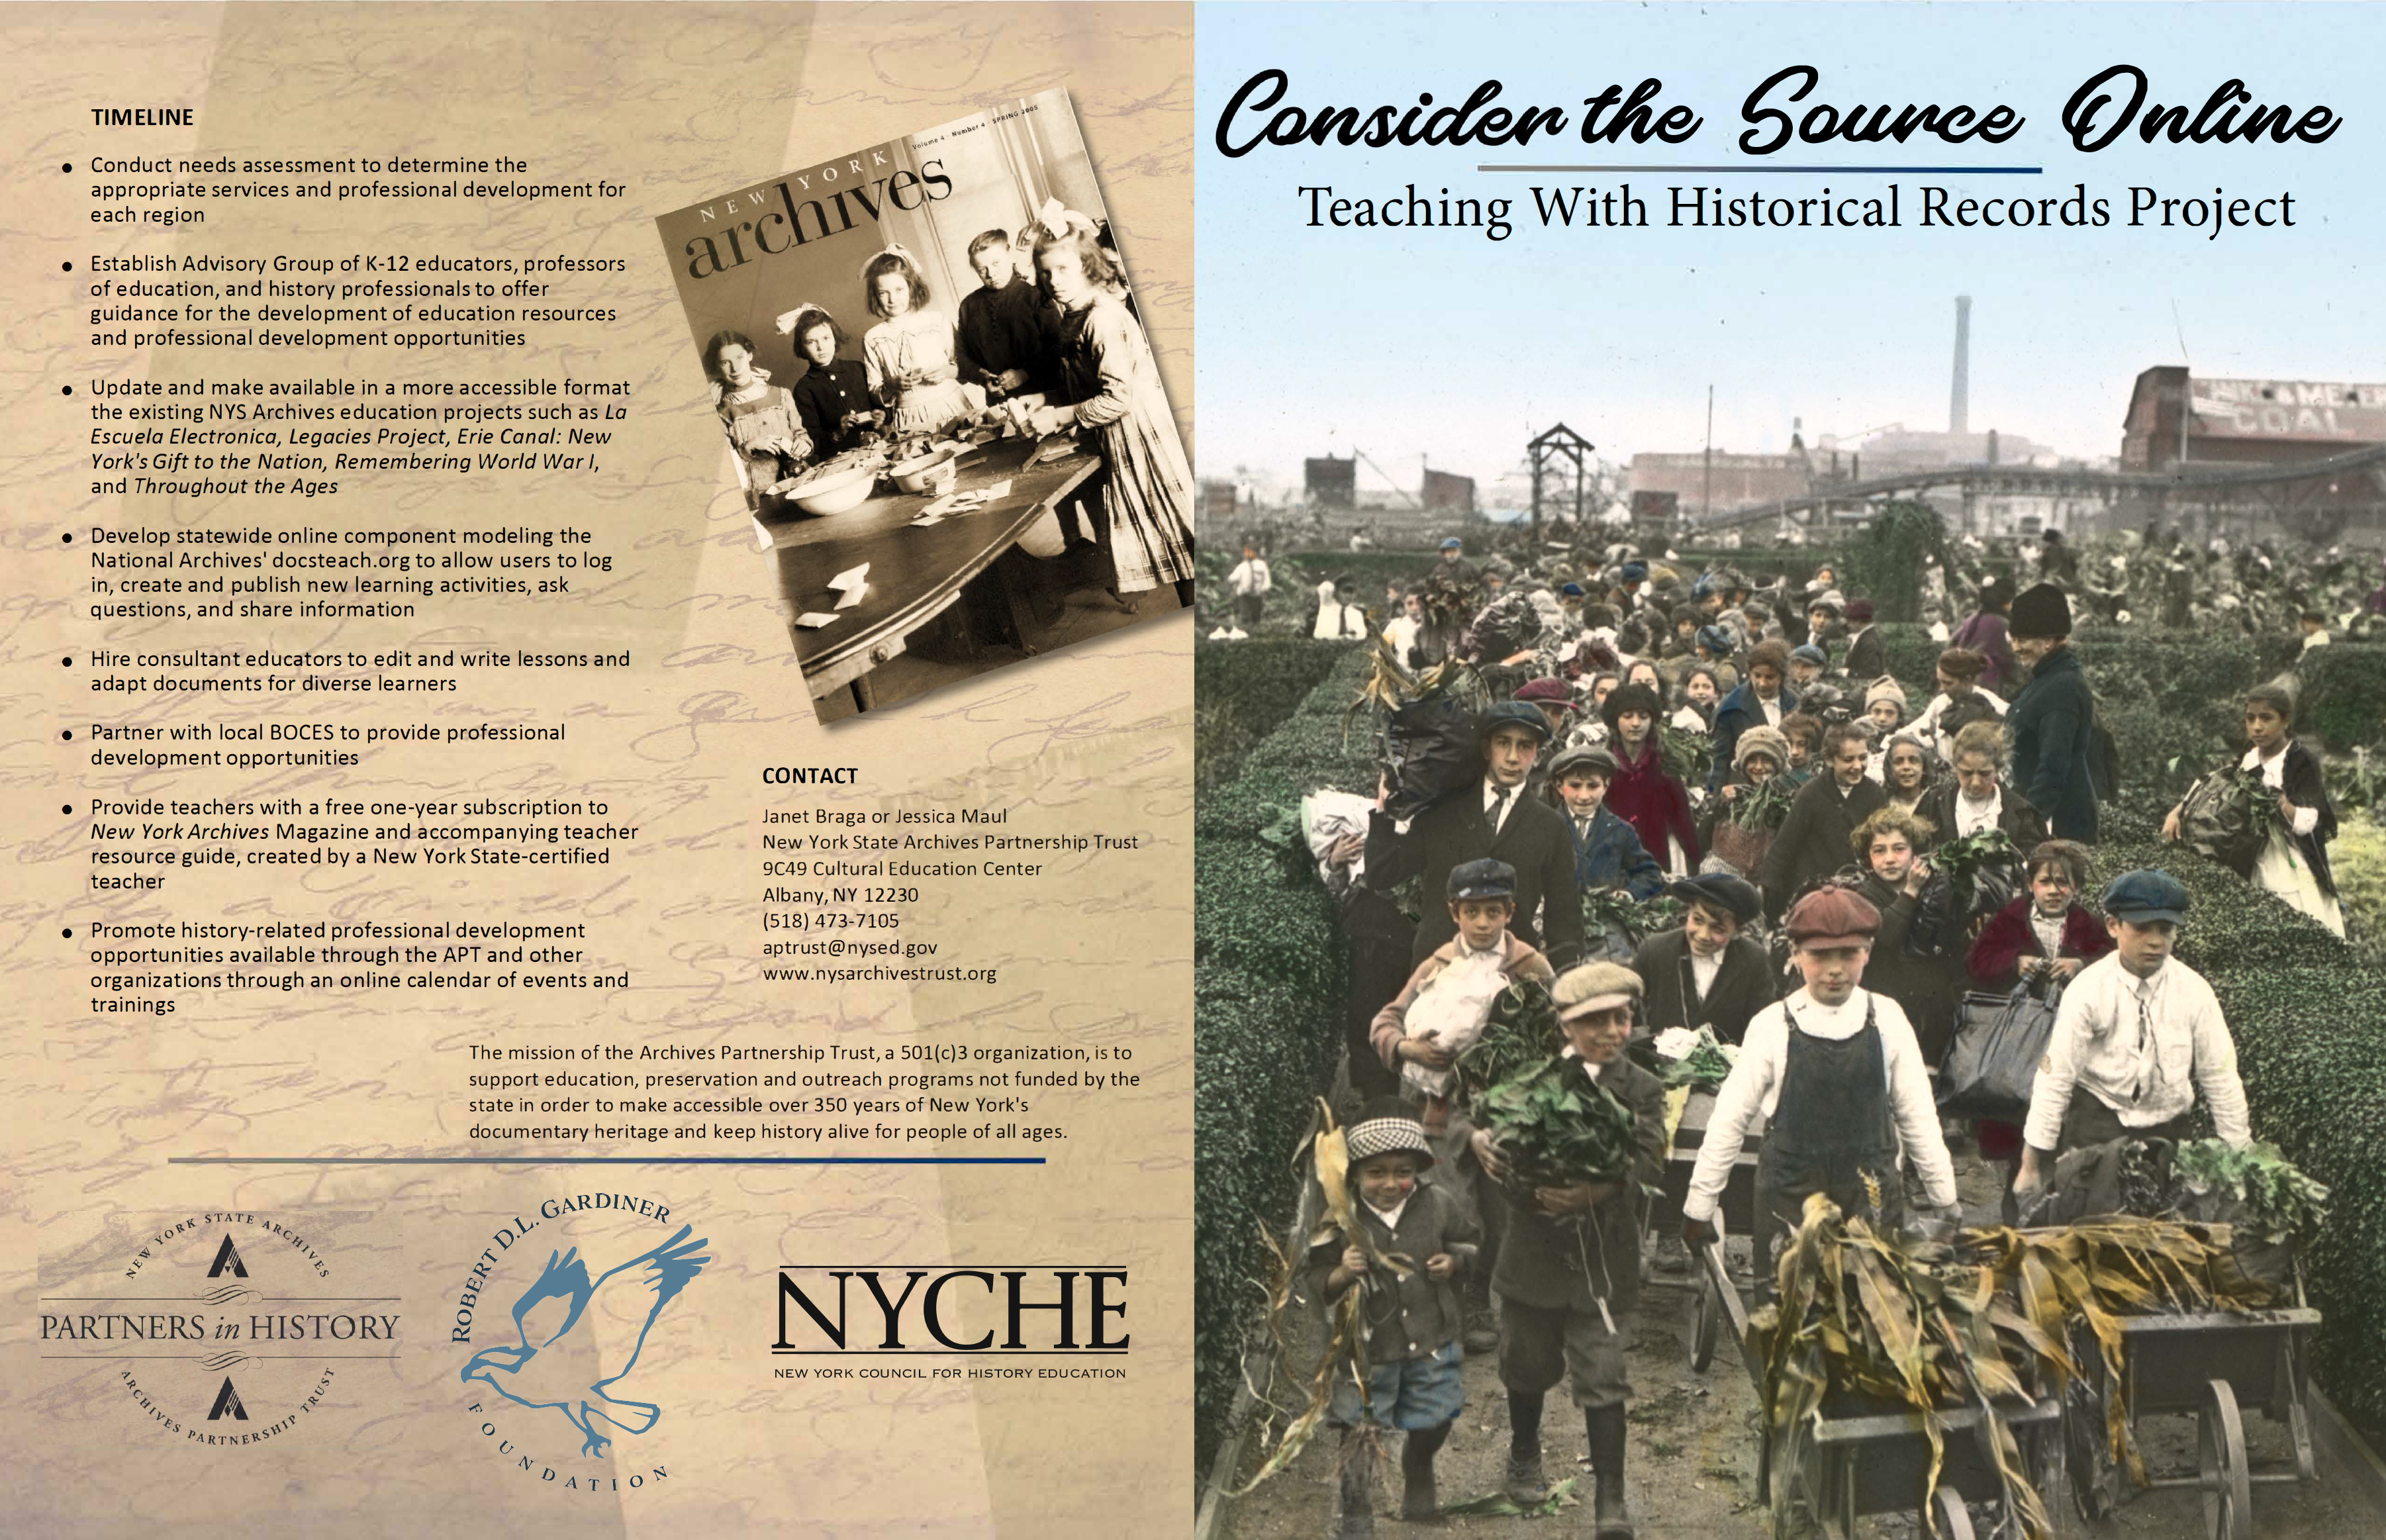 Consider the Source Online: Teaching with Historical Records Project at the New York State Archives Partnership Trust